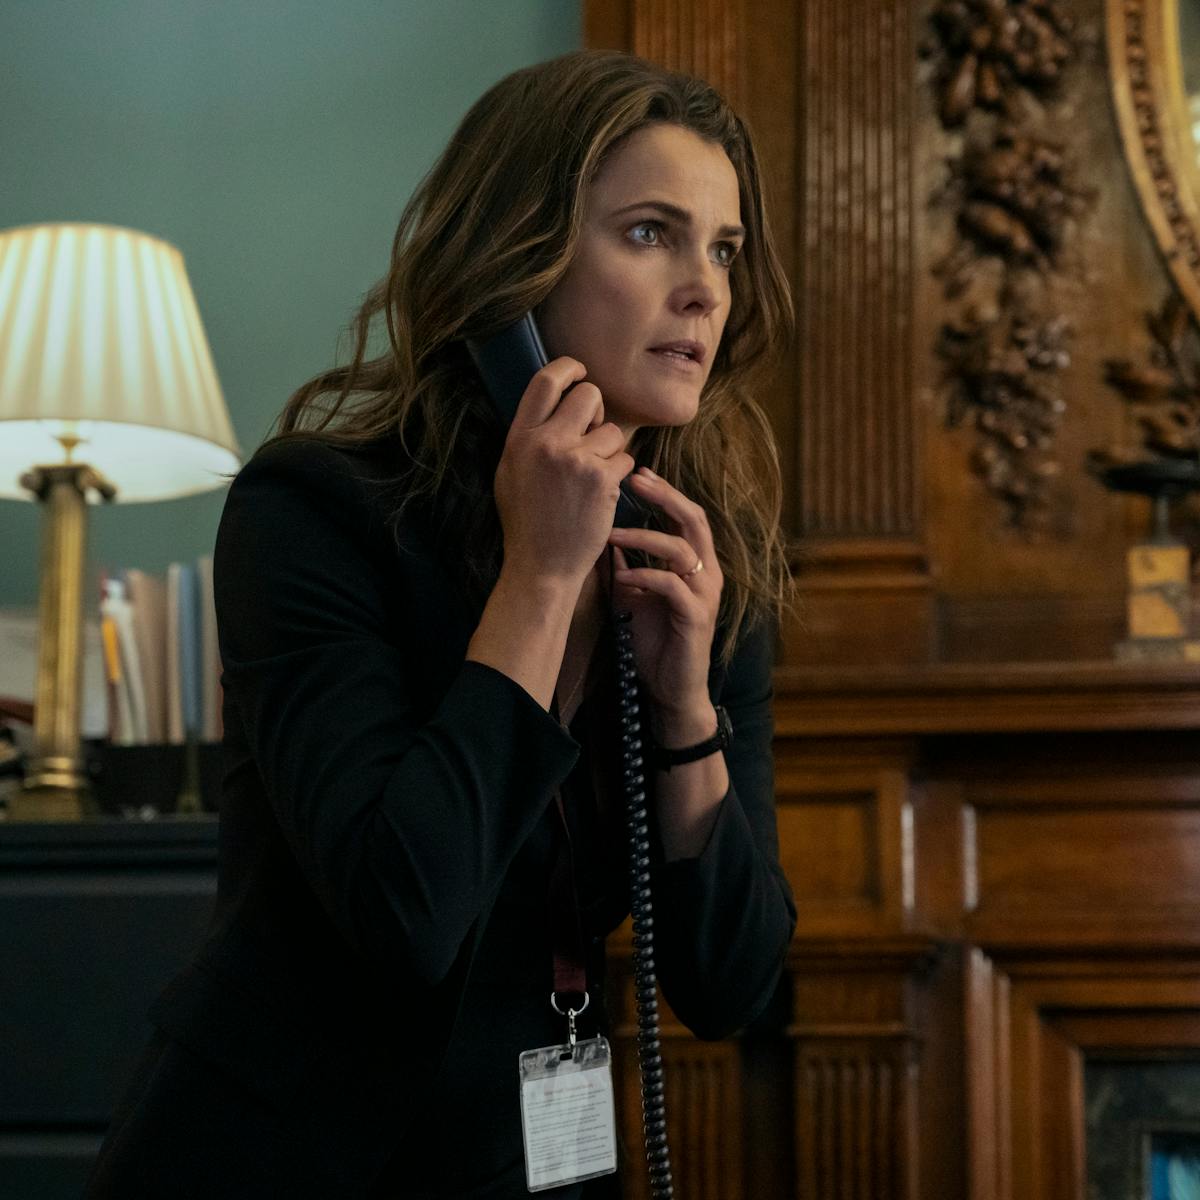 Kate Wyler (Keri Russell) wears all black and talks on the phone.